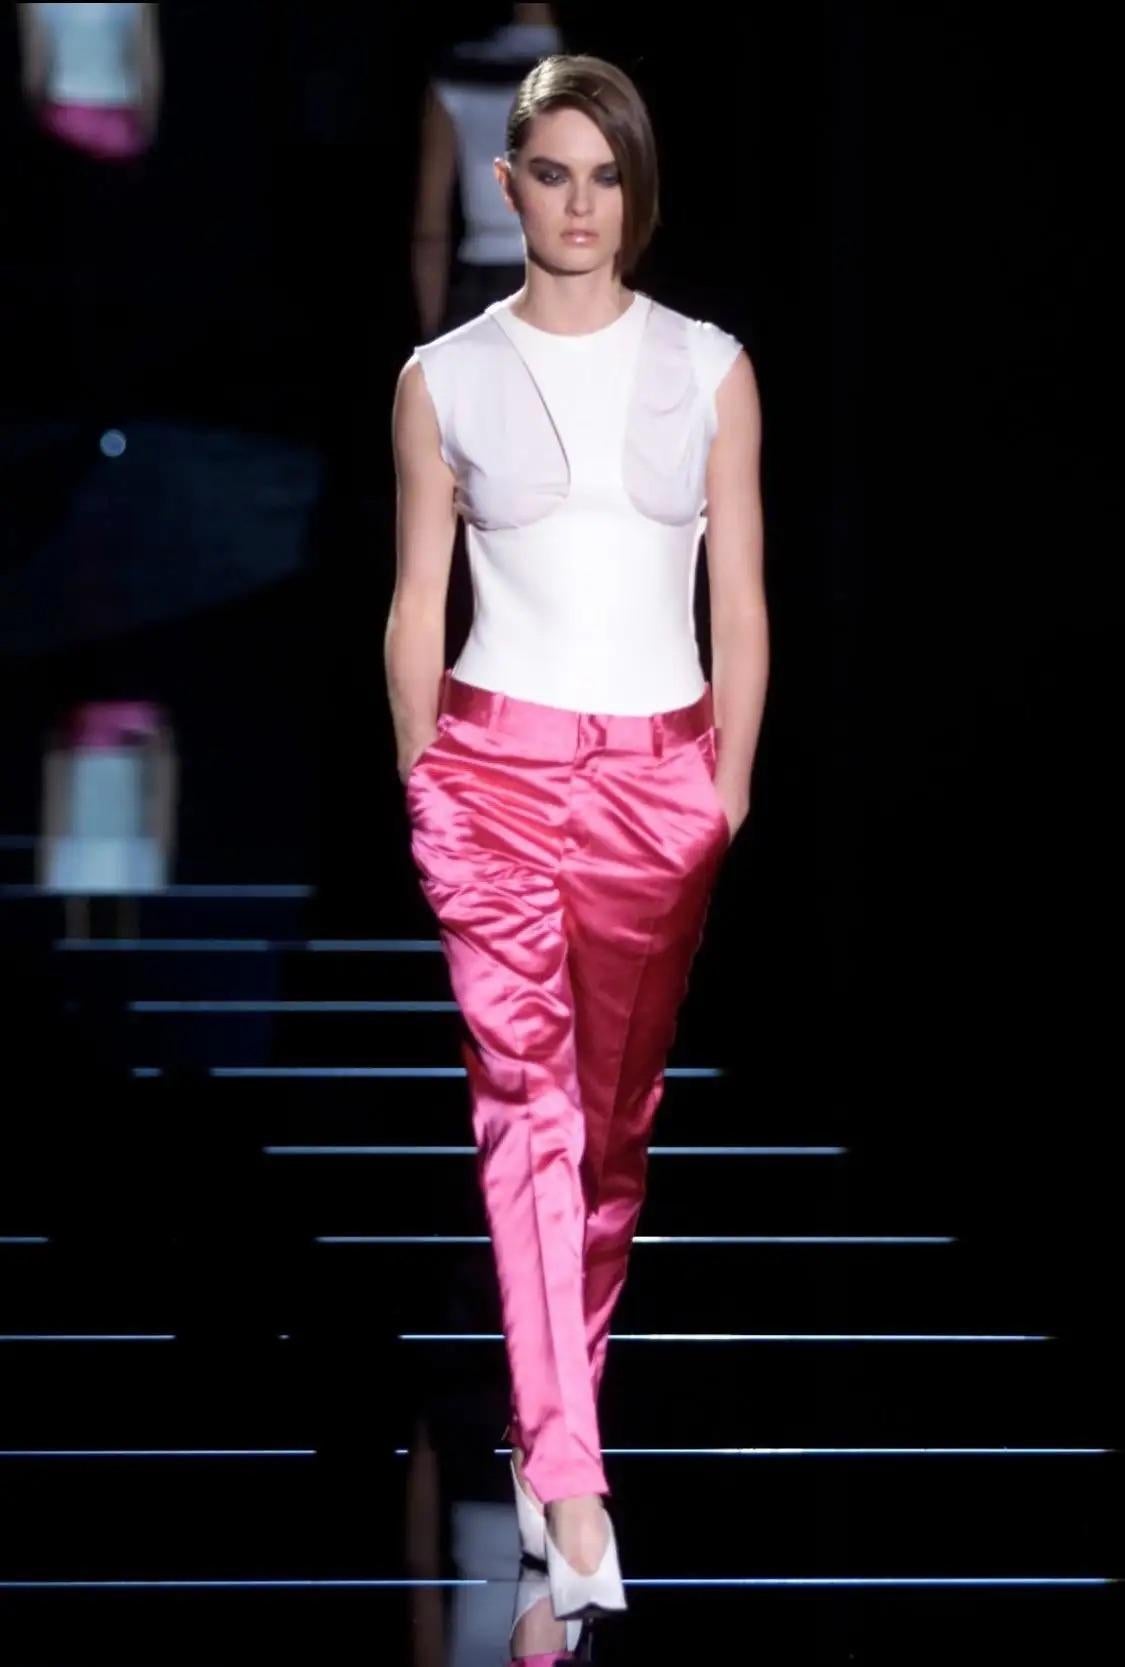 Presenting a pair of hot, hot pink satin Gucci pants, designed by Tom Ford. These incredible pants debuted on the Spring/Summer 2001 runway on look 23, modeled by Anouck Lepère. Constructed entirely of a lustrous satin silk, the pants glisten with